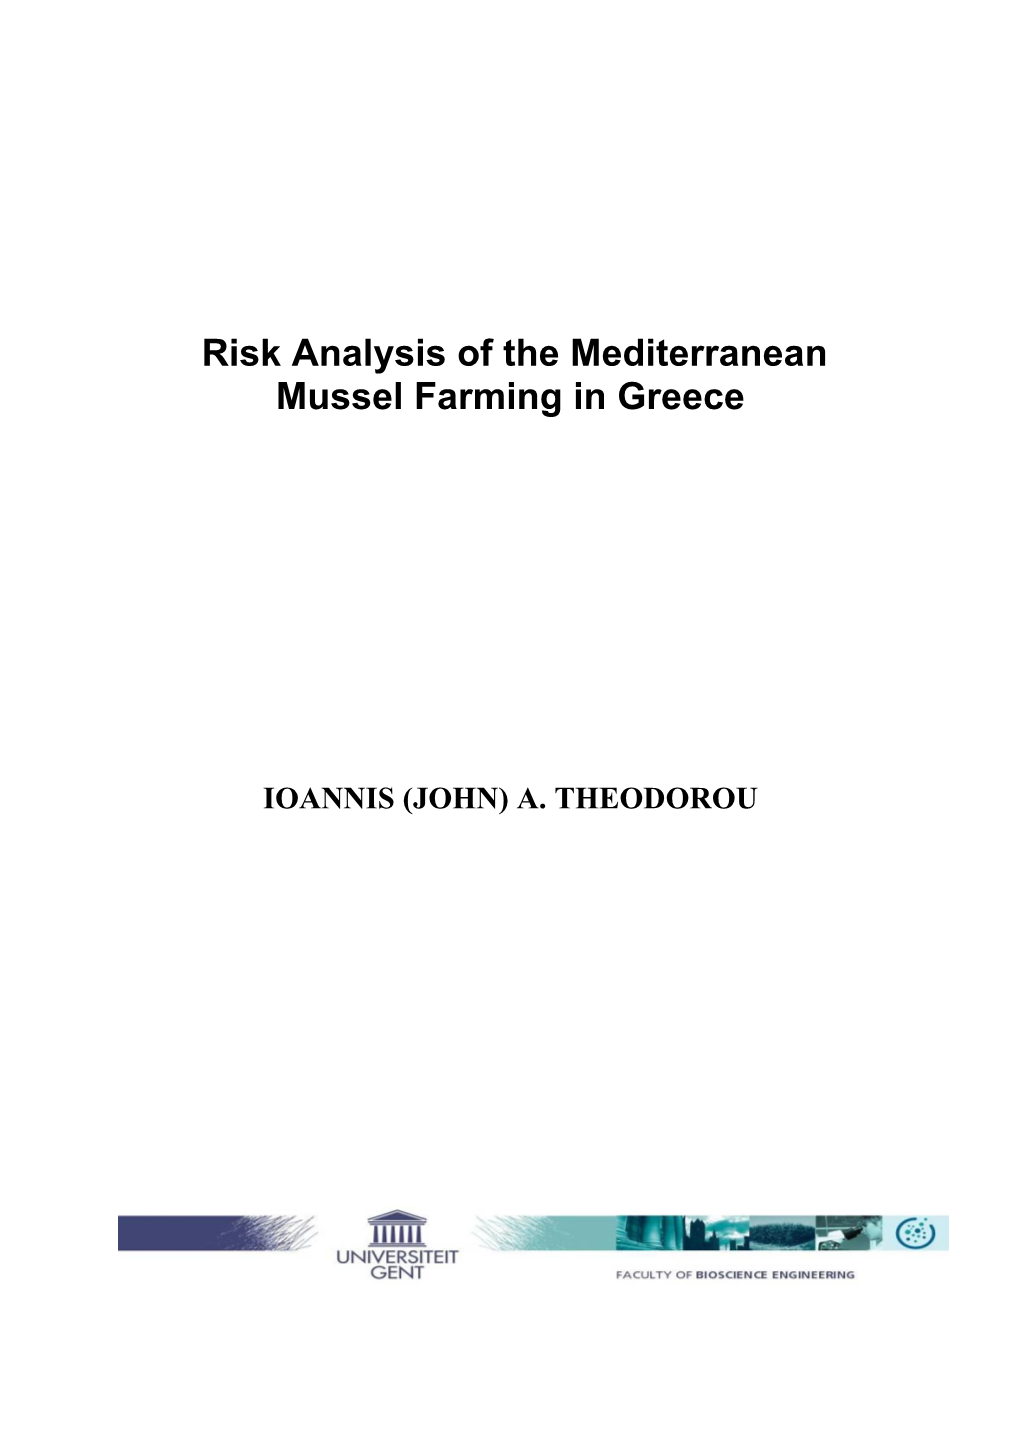 Risk Analysis of the Mediterranean Mussel Farming in Greece